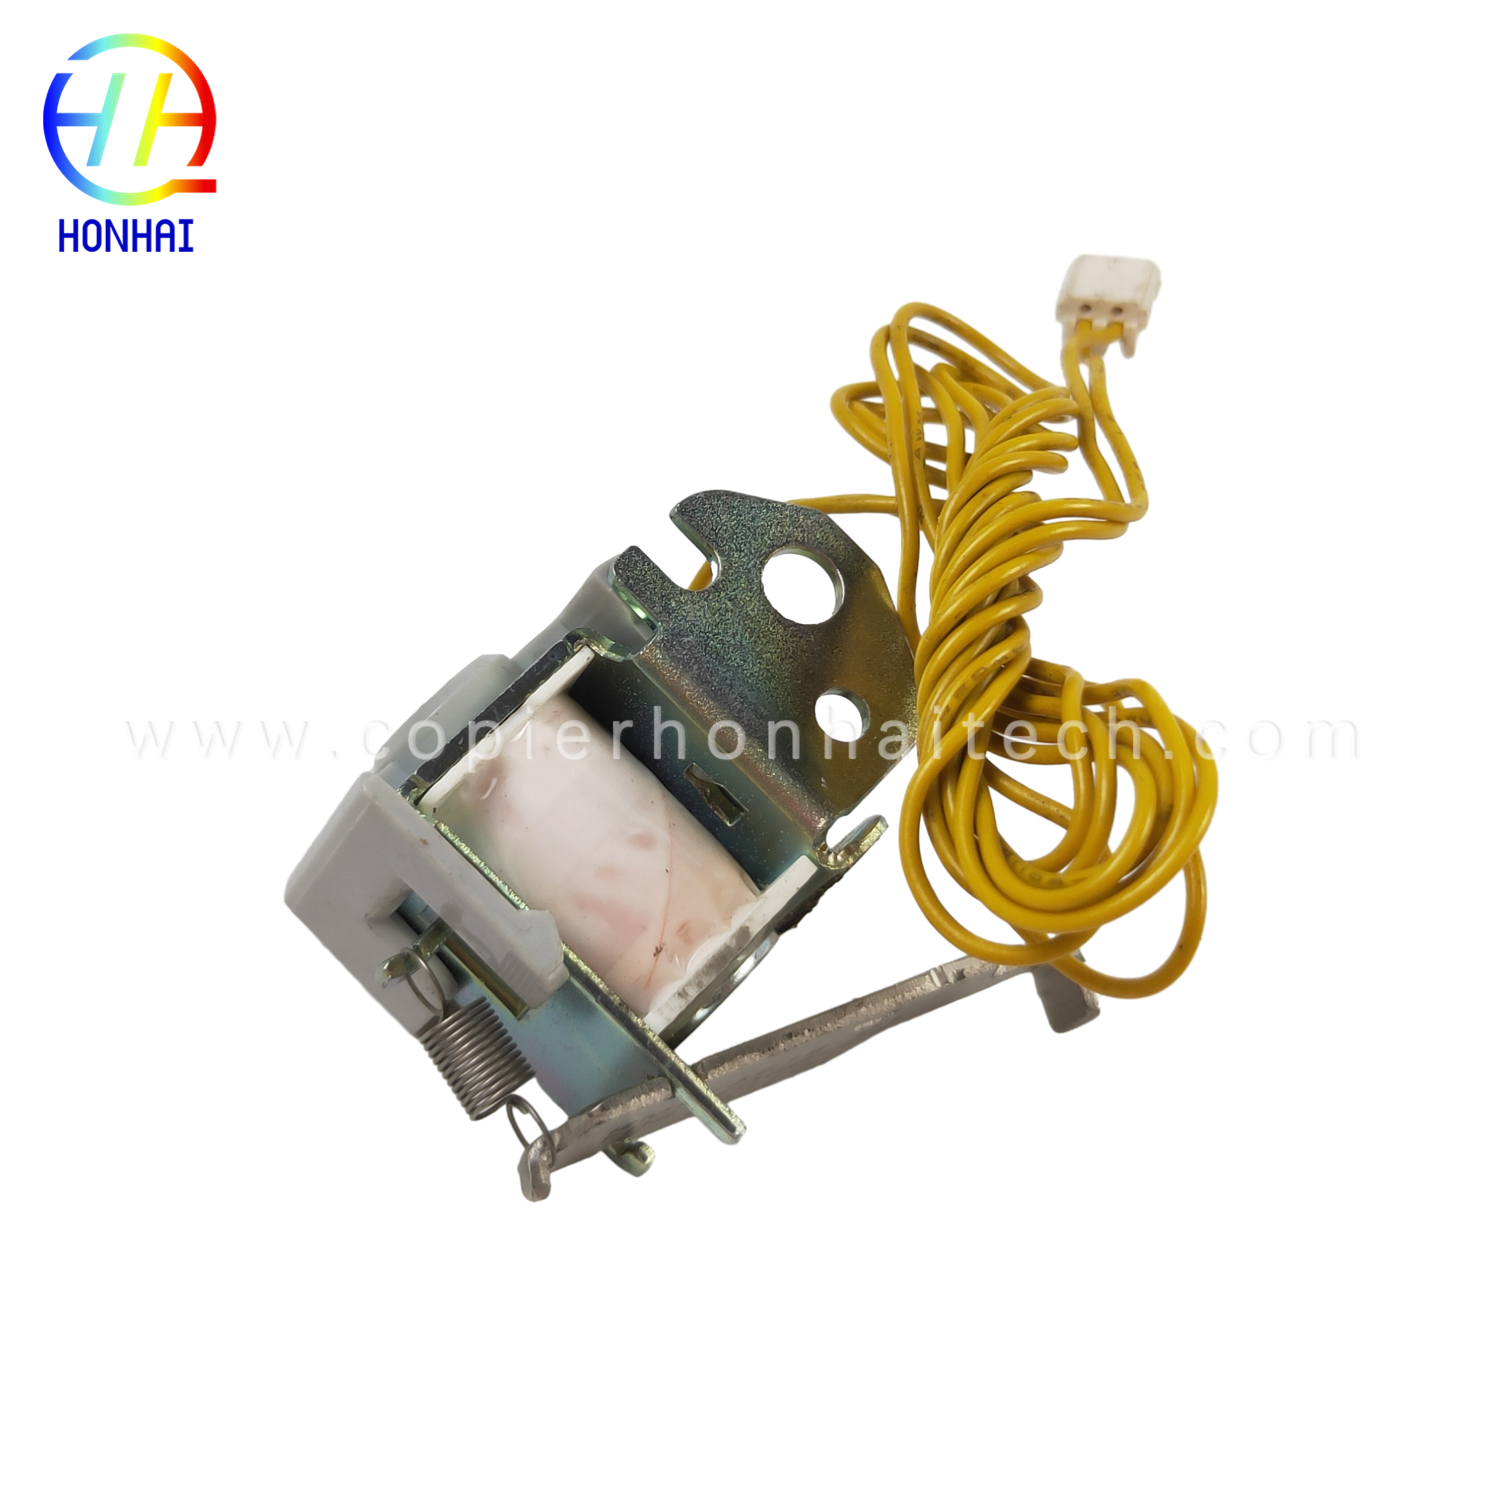 Nullam Solenoid RM1-4618 Fit for HP P1007 1212 M1132 .